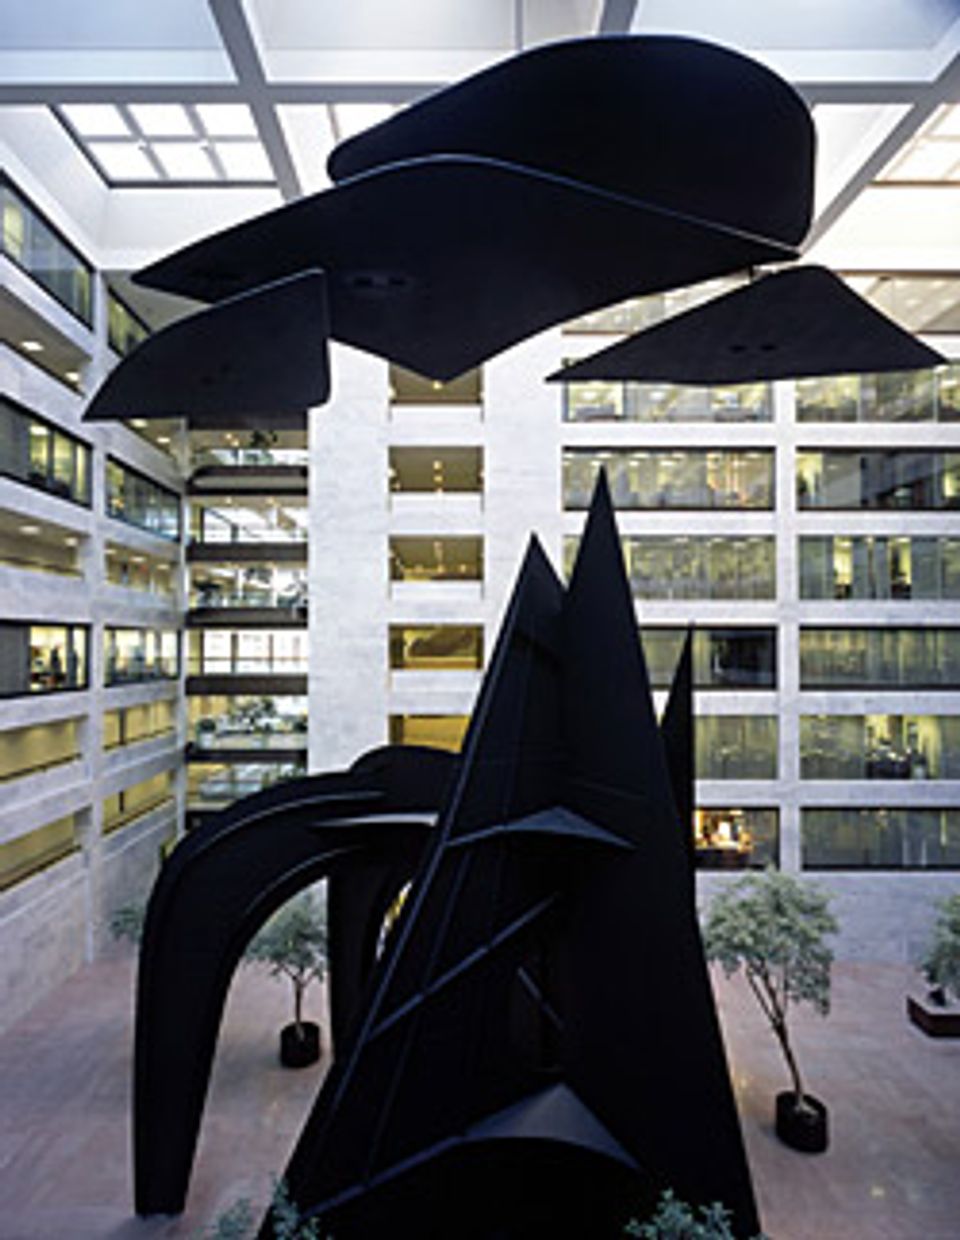 Alexander Calder's Mountains and Clouds at the Hart Building